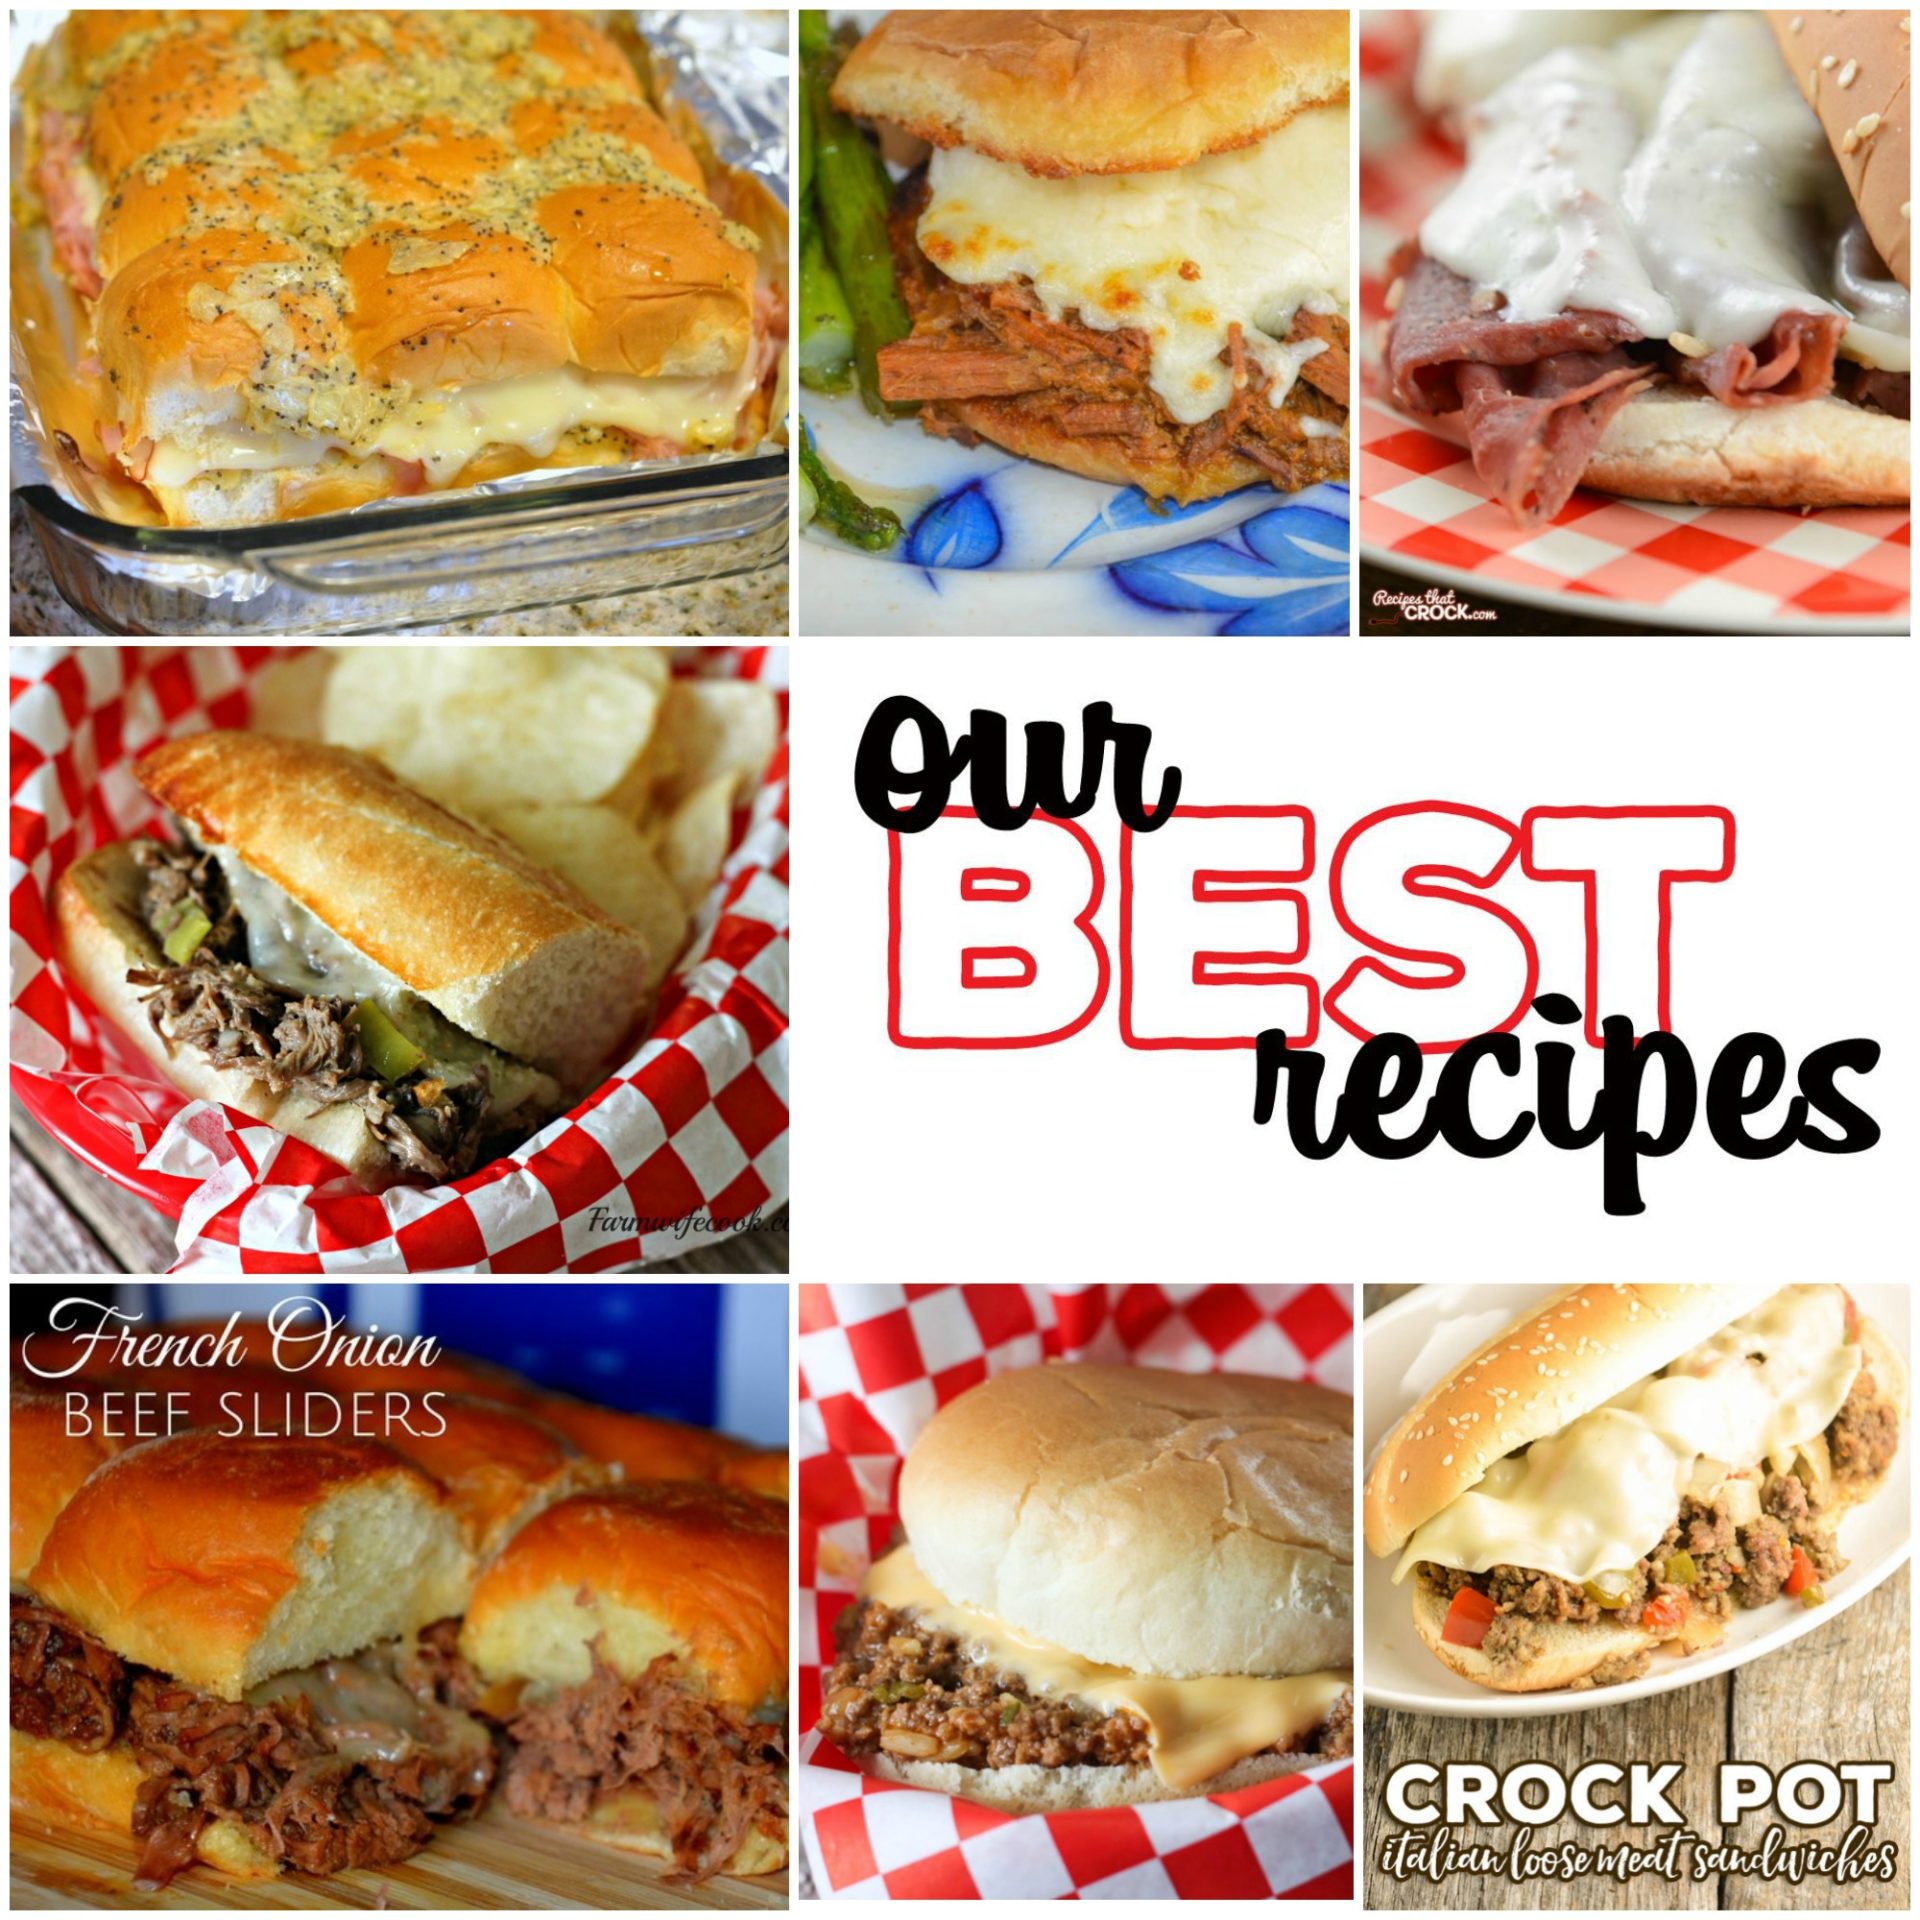 8 Great Sandwich Recipes (Our Best Recipes)